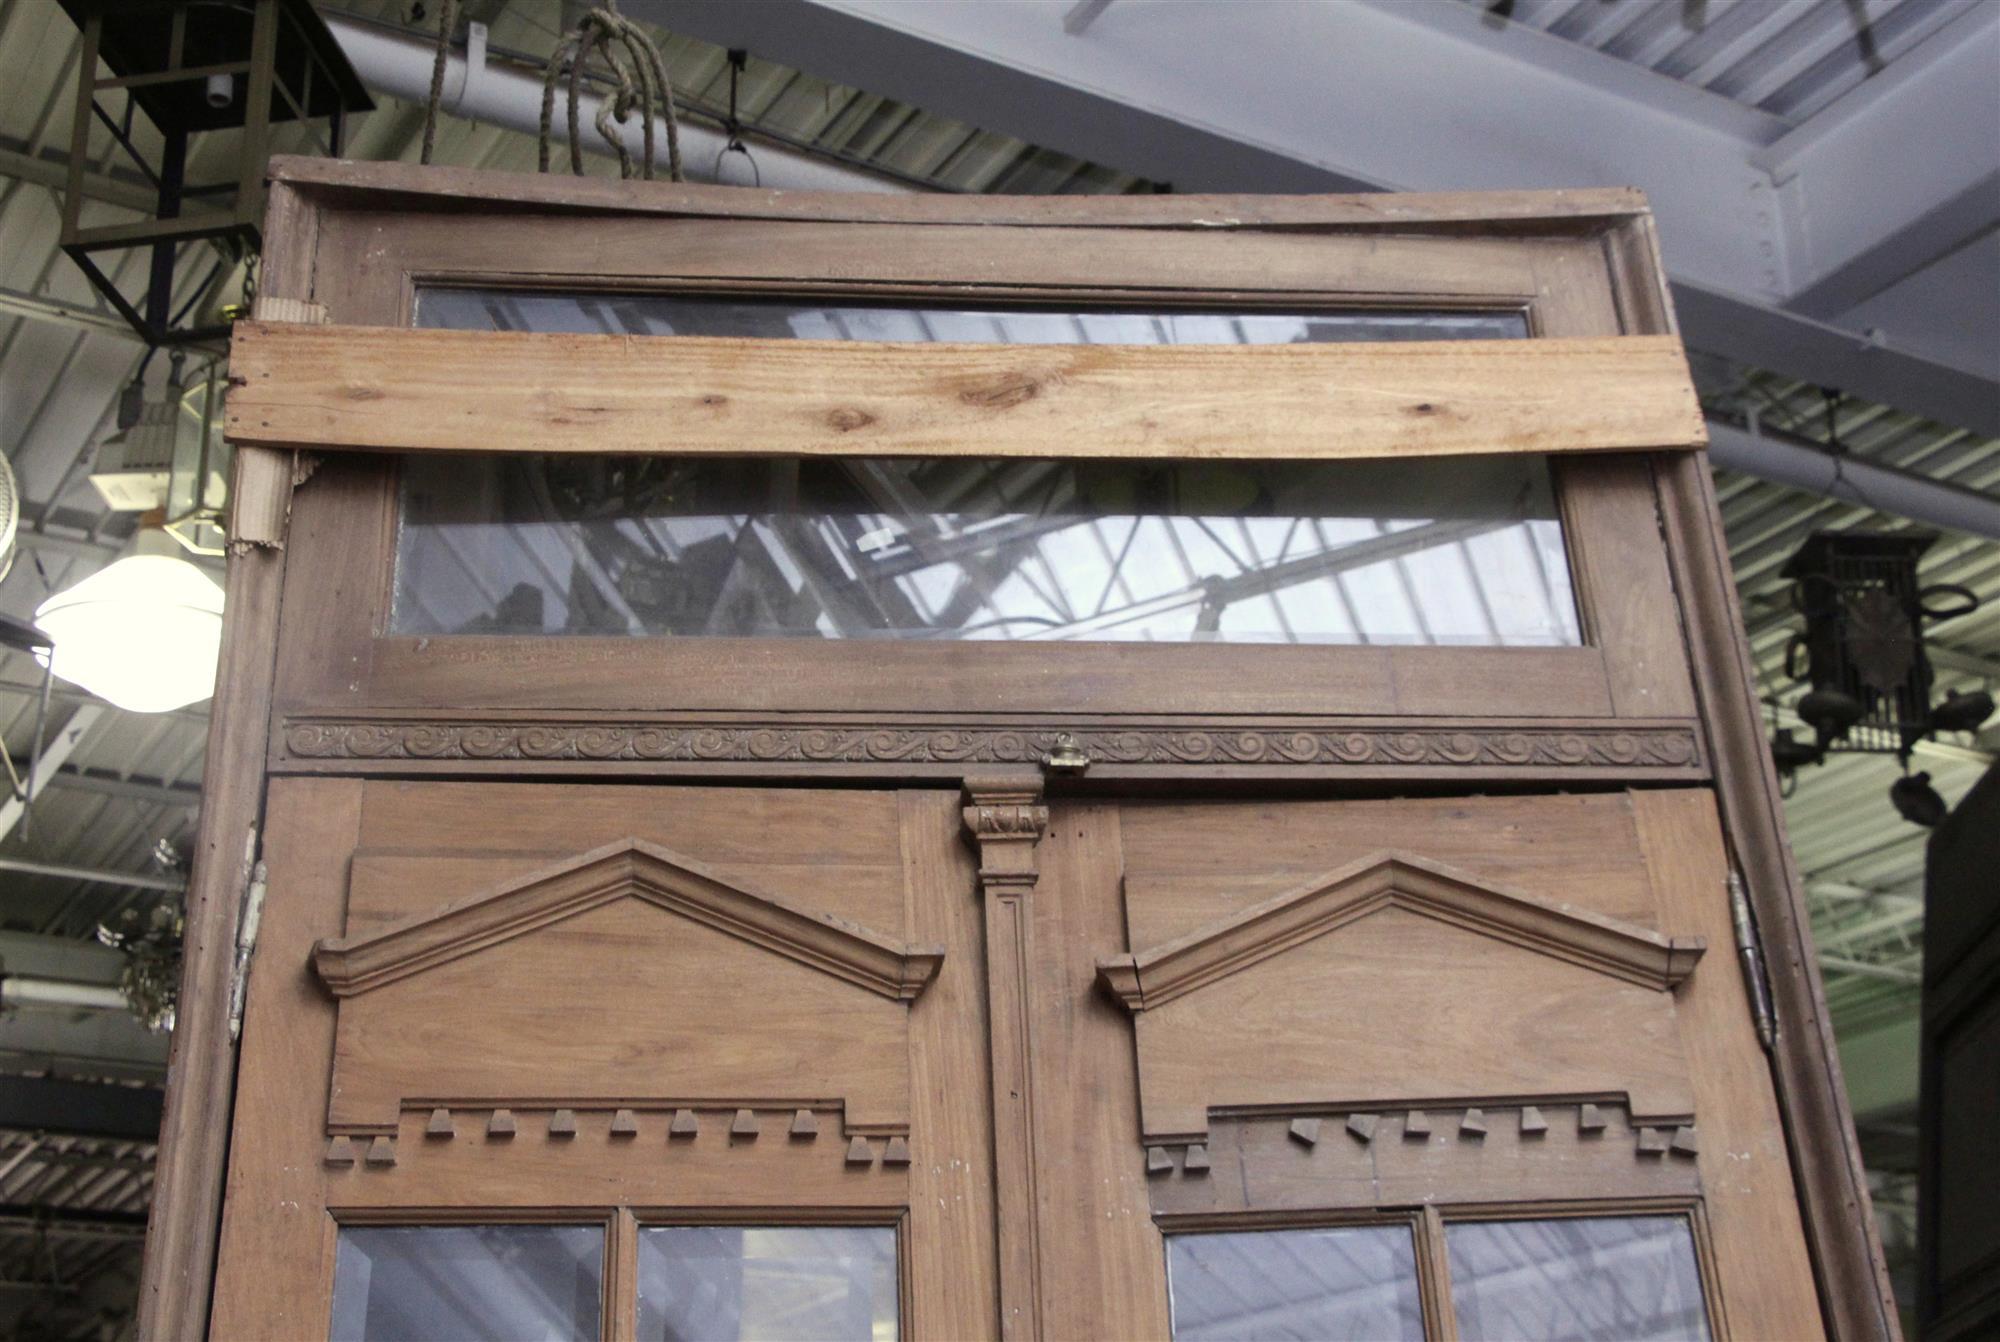 Spanish cedar 12 glass pane double doors with French beveled glass, windows and transom. The doors have beautiful carved details throughout the frame. Priced as a set. The dimensions are: 60 in. W x 130 in. H overall, doors 56 in. W x 98 in. H. This